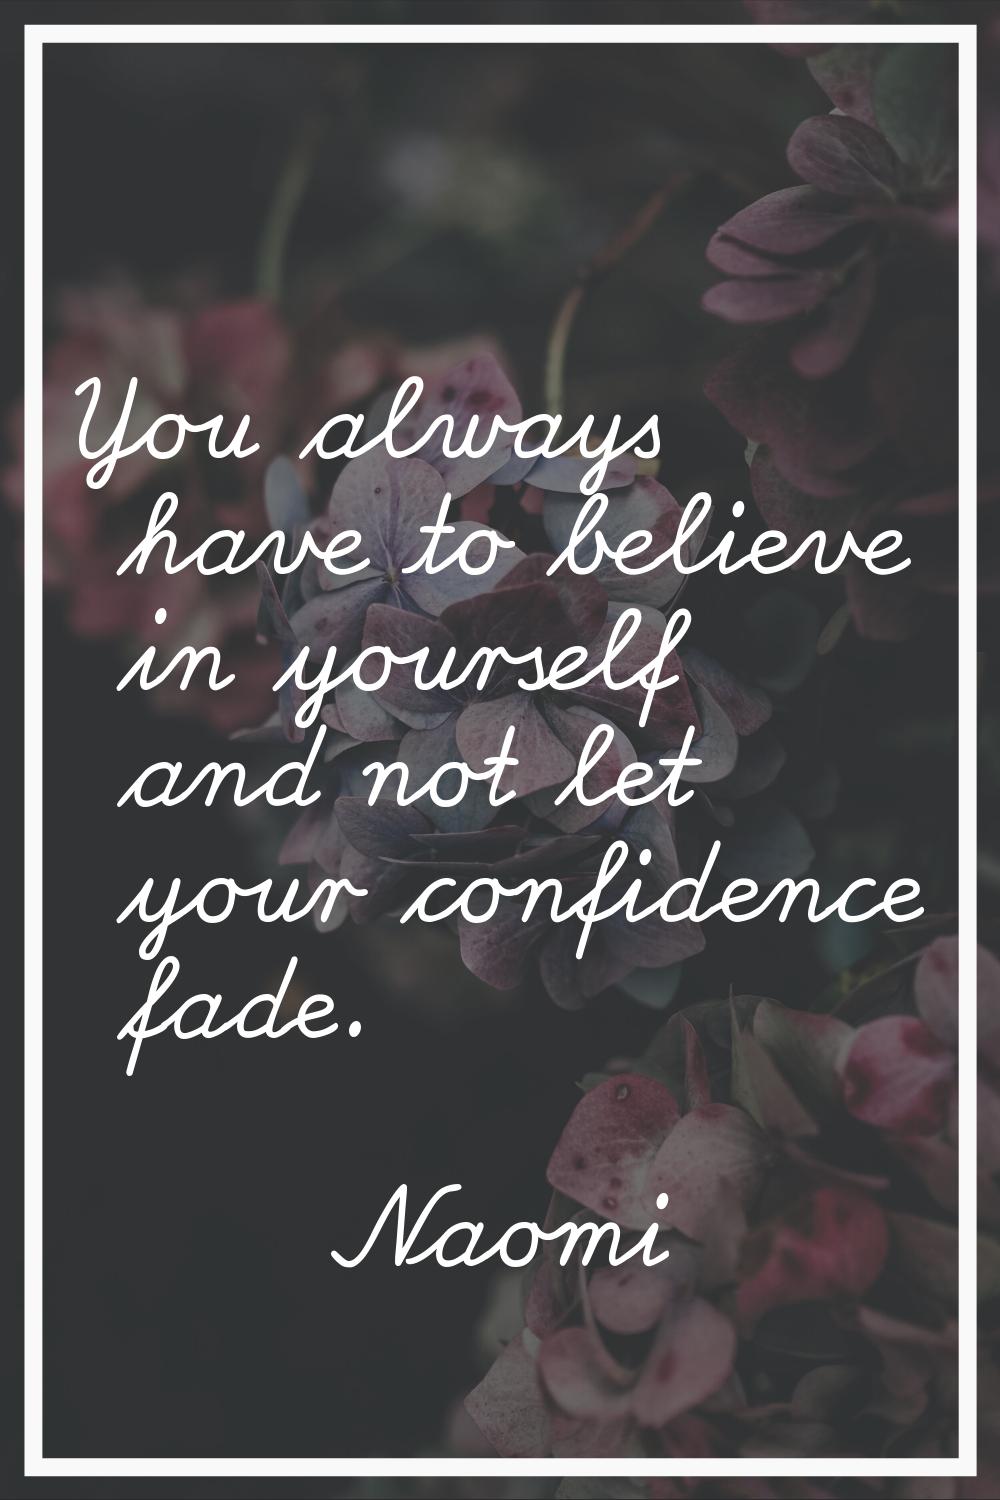 You always have to believe in yourself and not let your confidence fade.